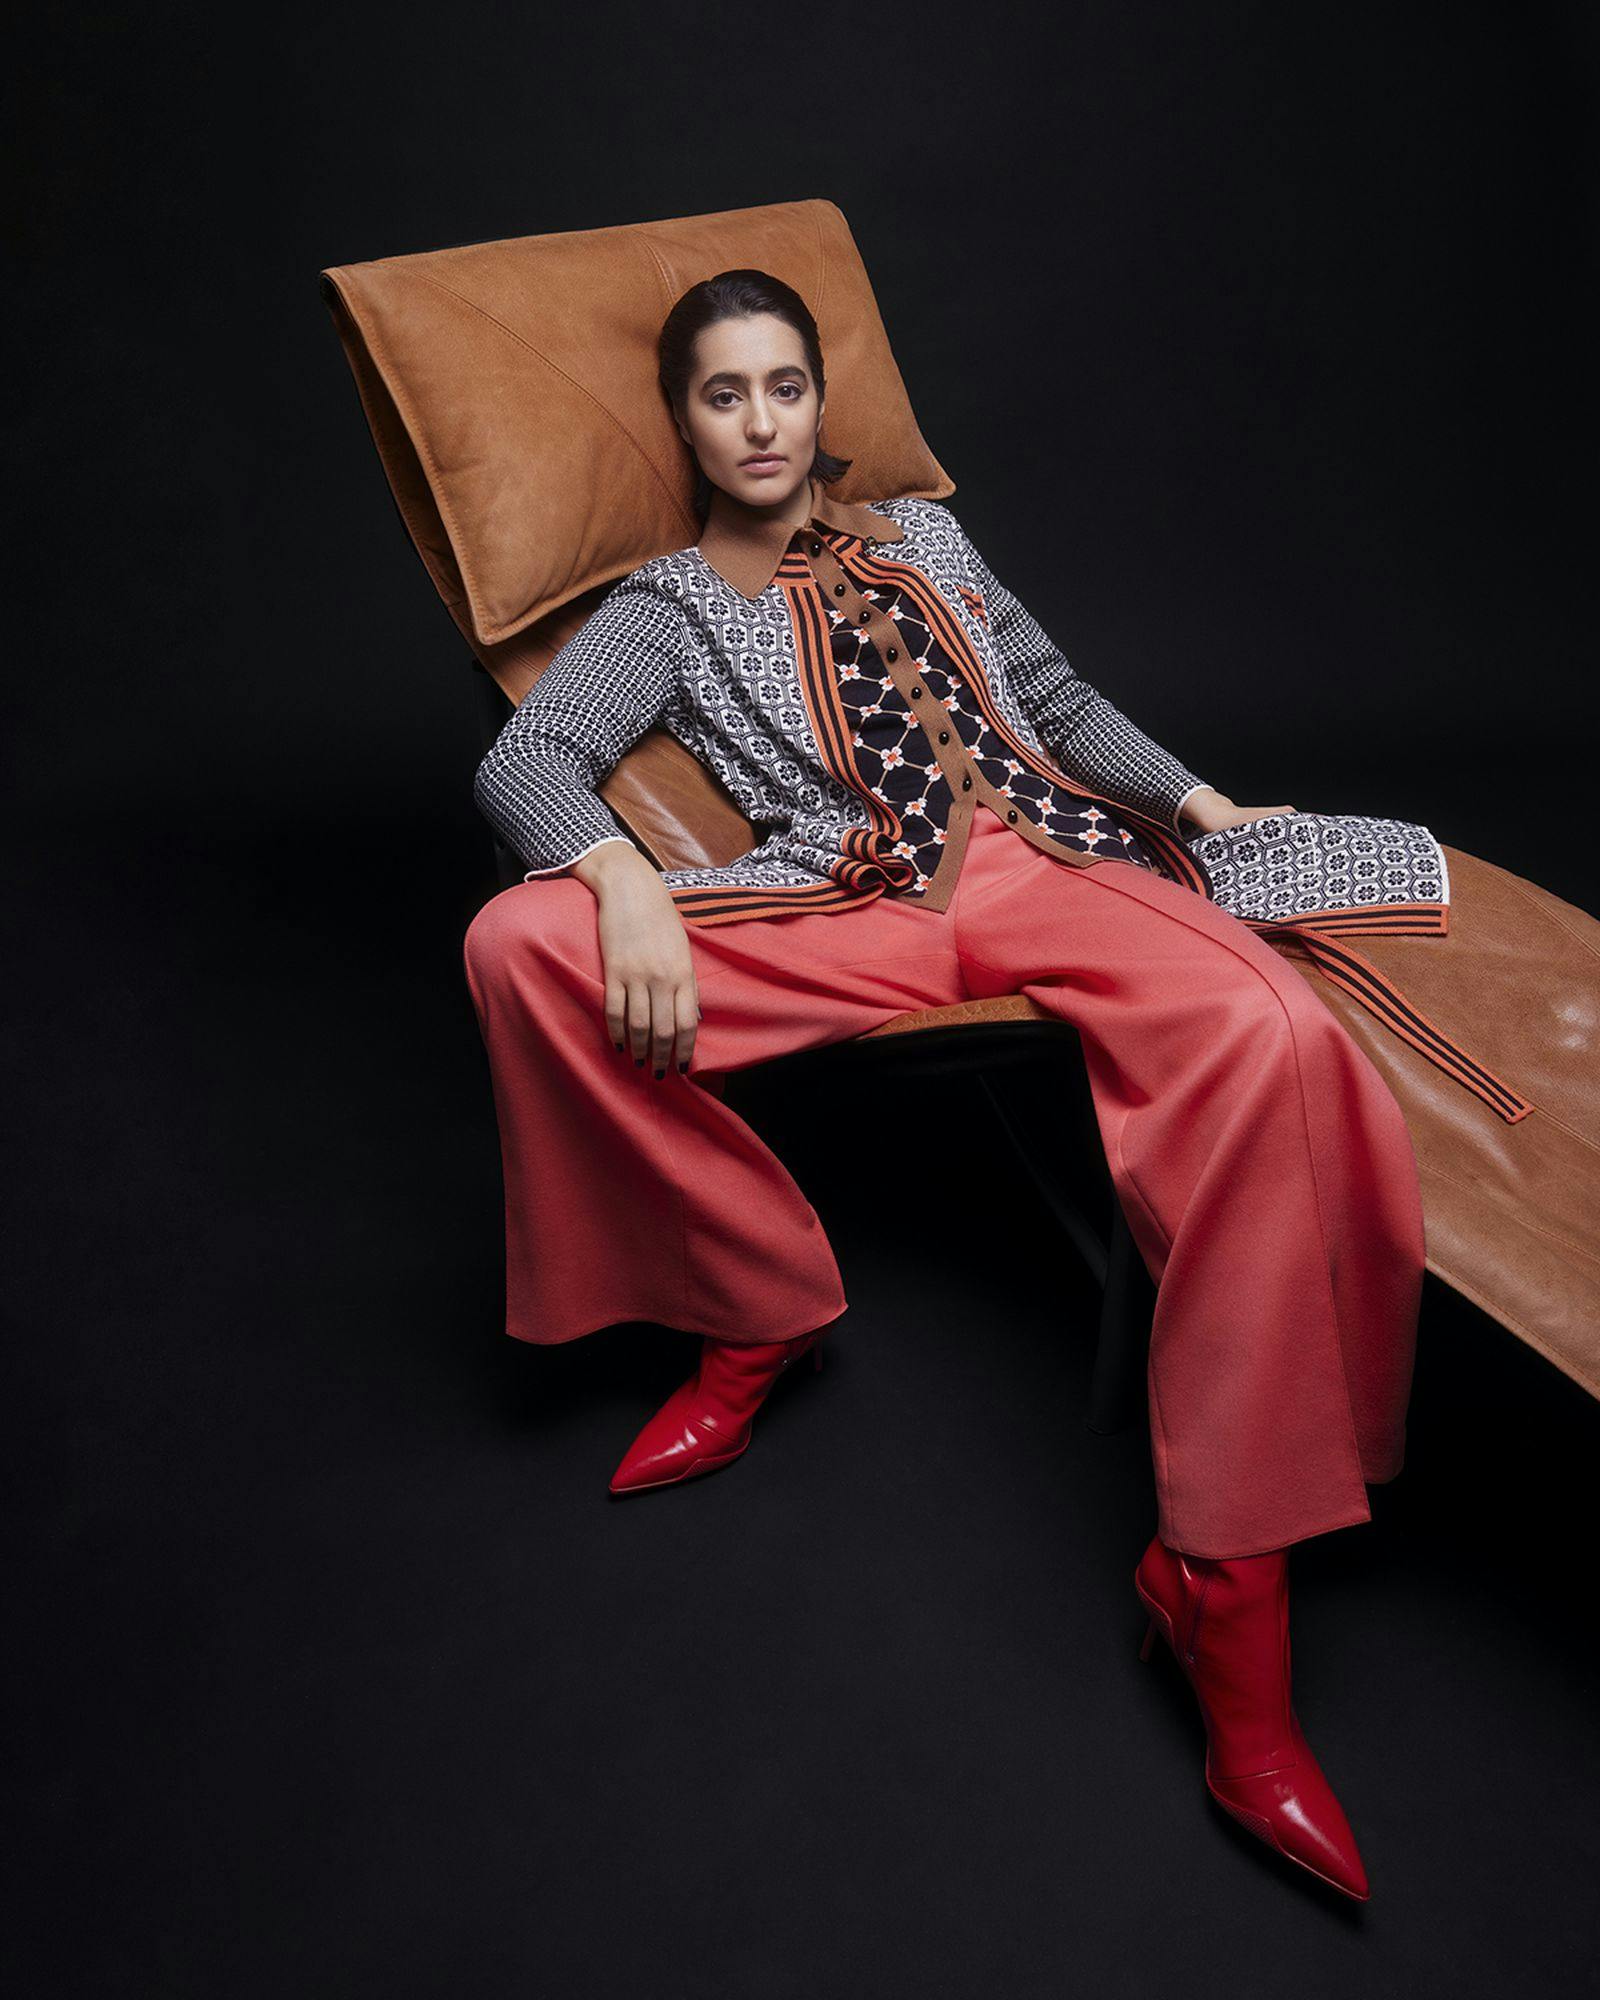 Oleana Autumn winter collectoin – high-end wool clothing and knitwear, made in norway. Women sitting laidback in power pose.